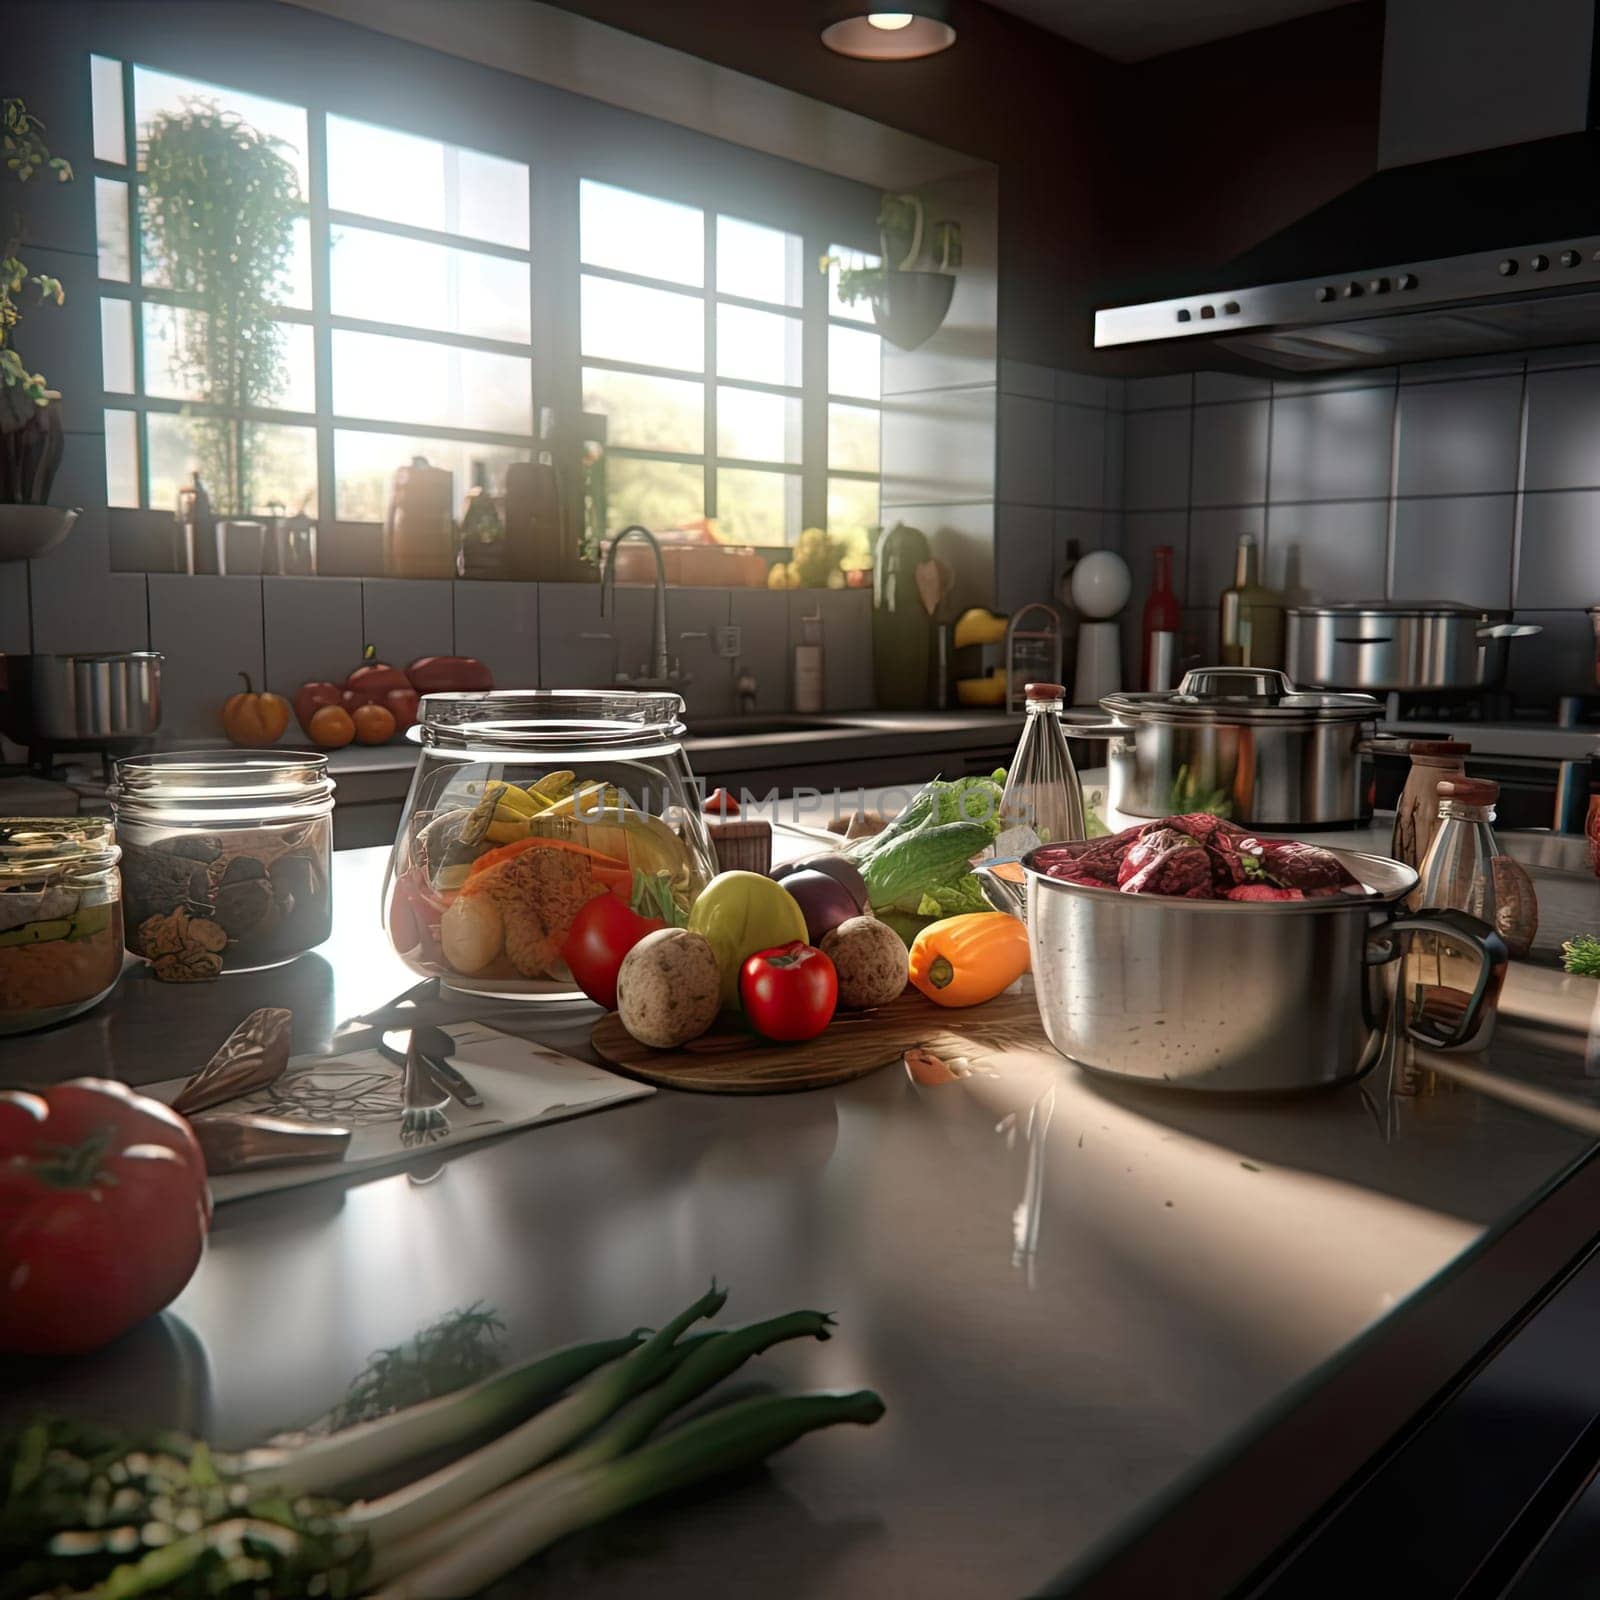 The interior of the kitchen of the future. The concept of a smart home